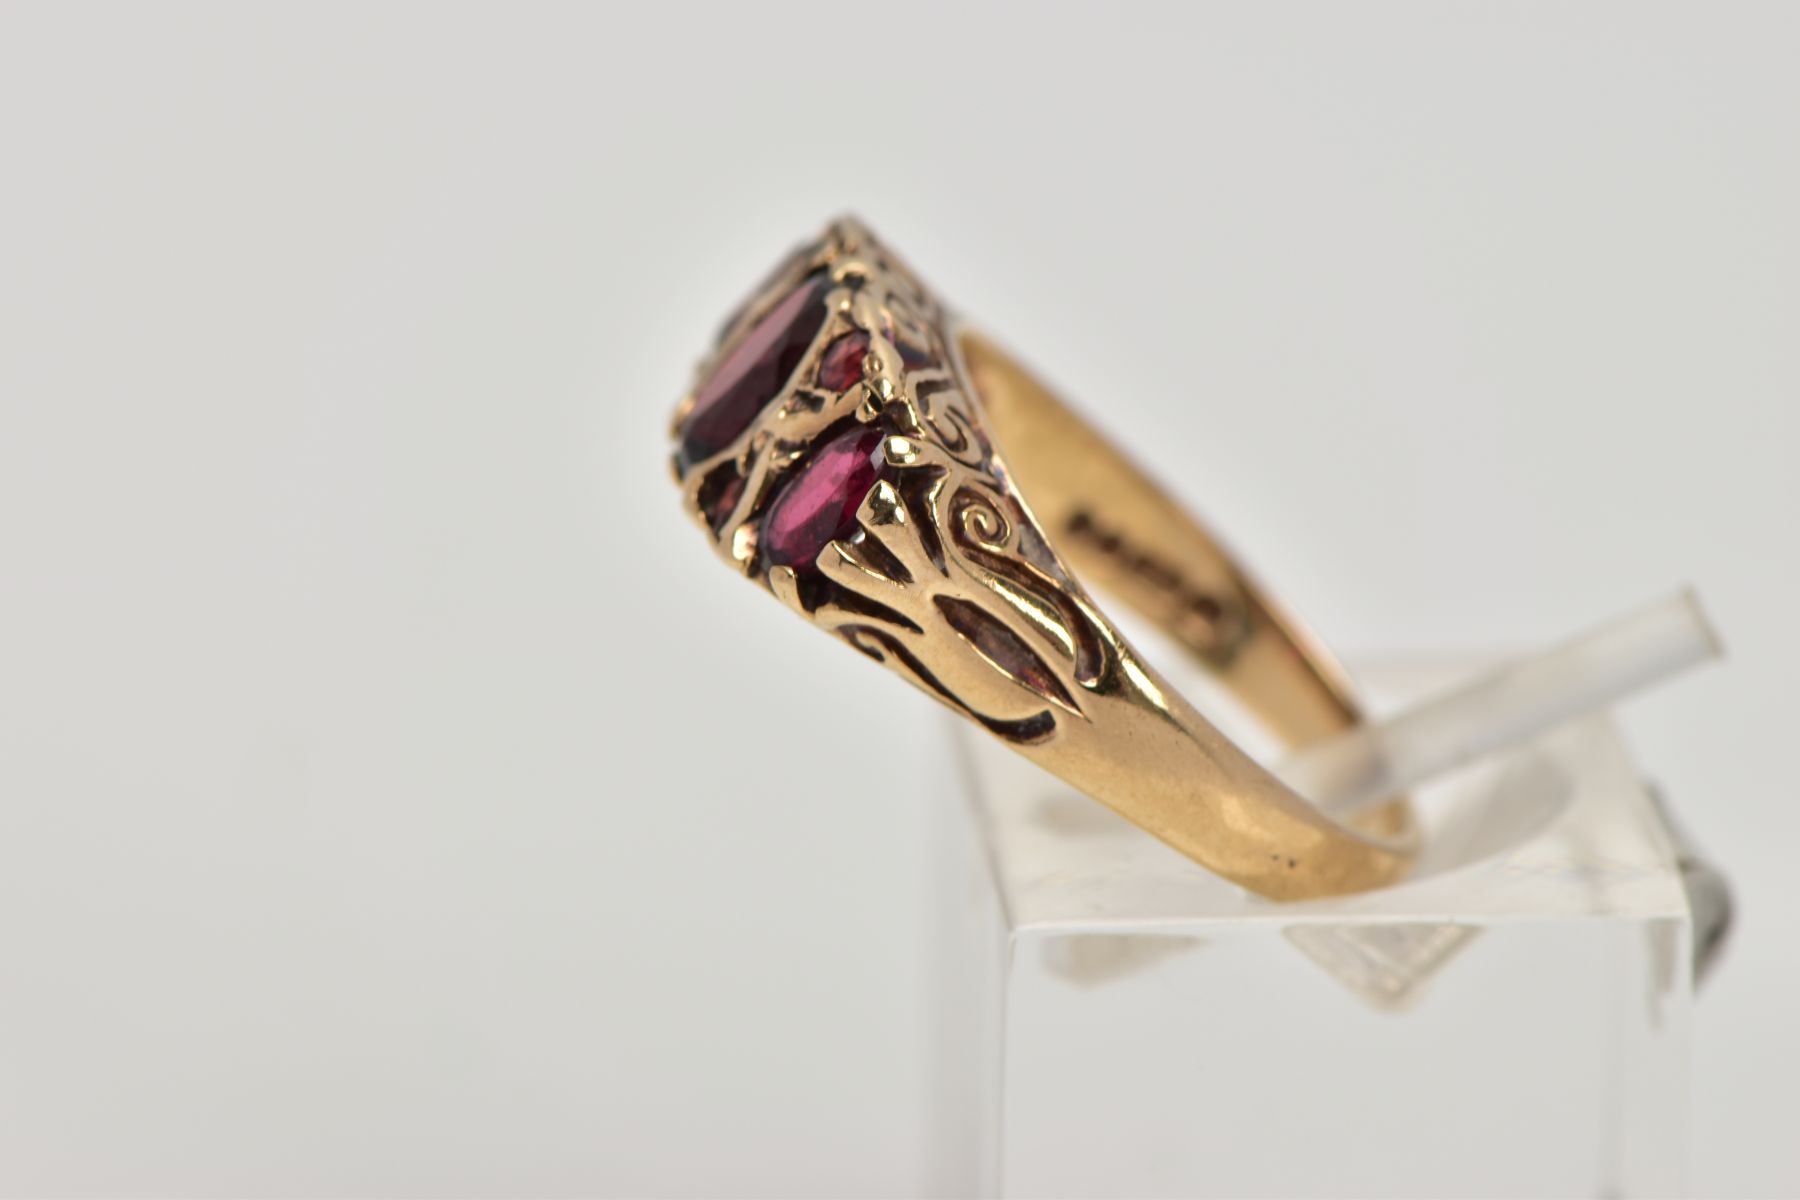 A 9CT GOLD THREE STONE GARNET RING, designed with a row of three graduated oval cut garnets, - Image 2 of 4